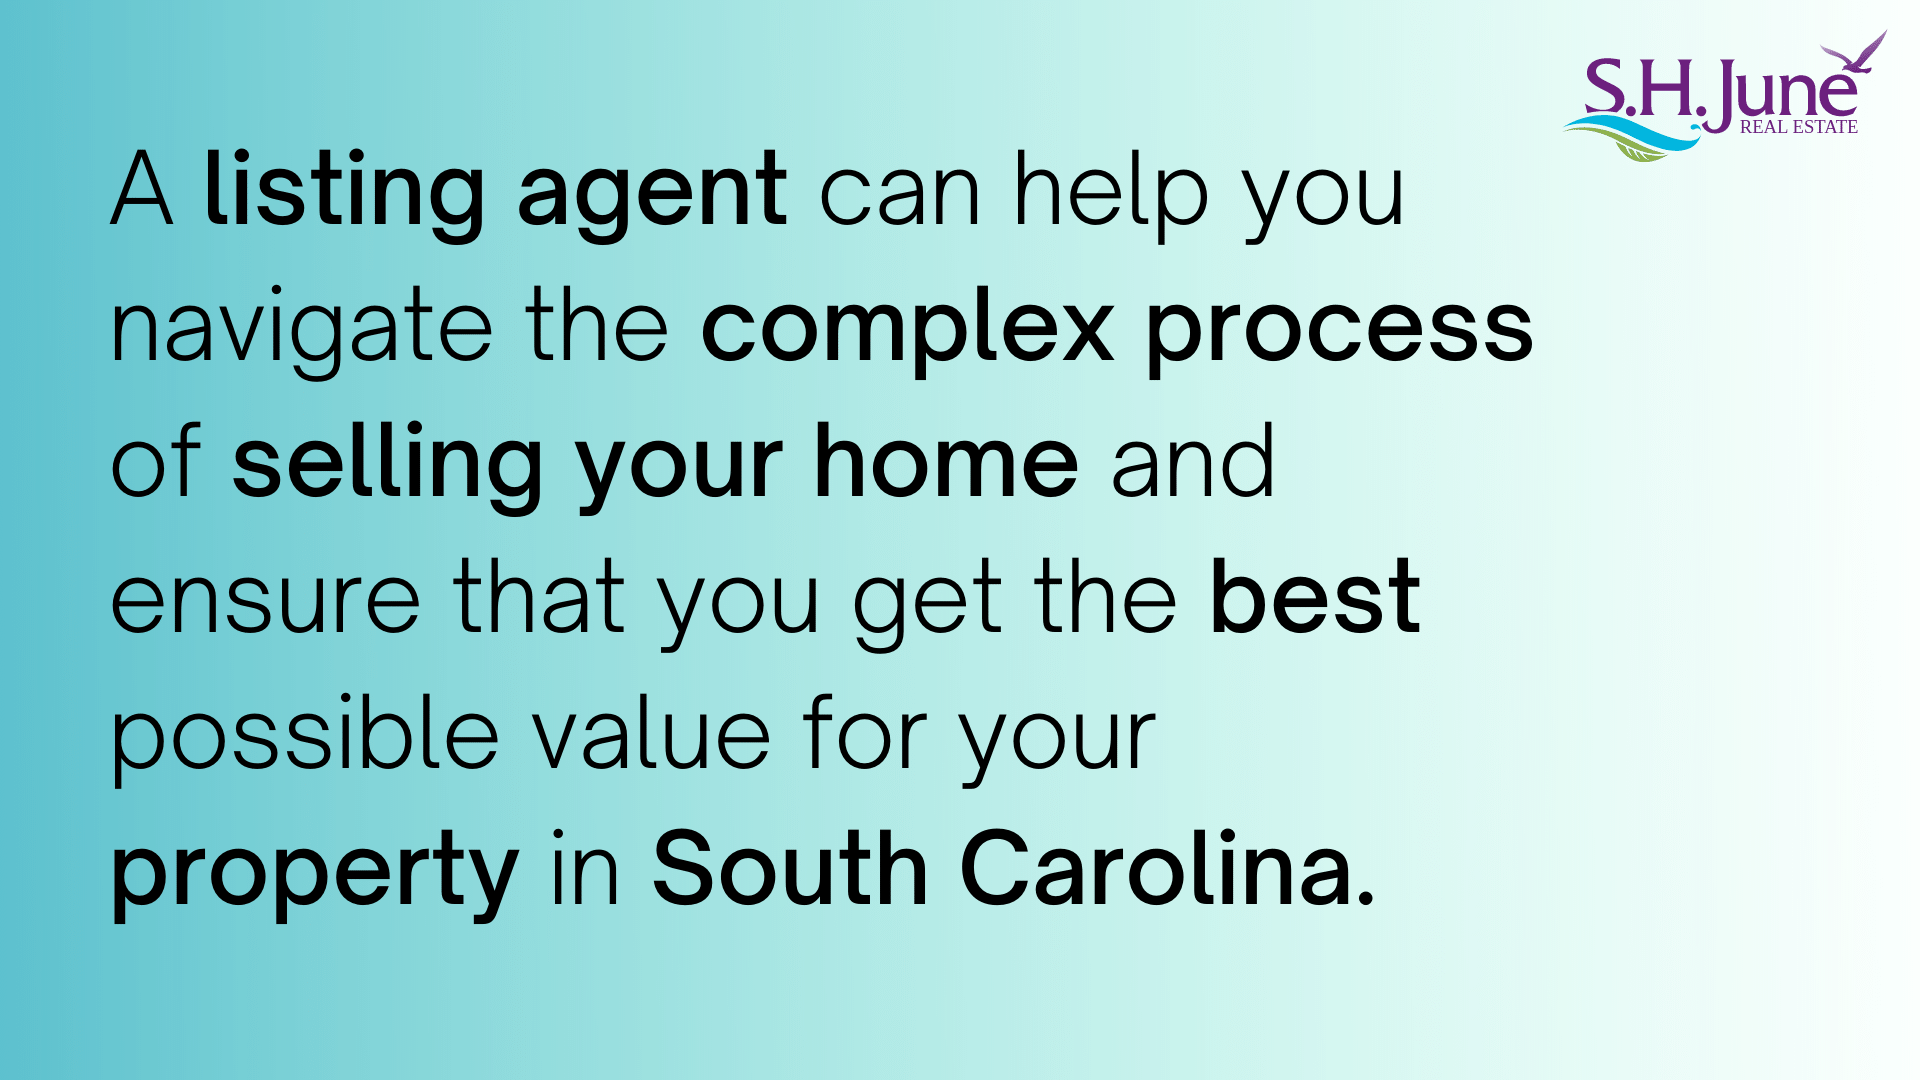 Expert Pricing and Market Knowledge Gain an Edge in South Carolina's Real Estate Market.